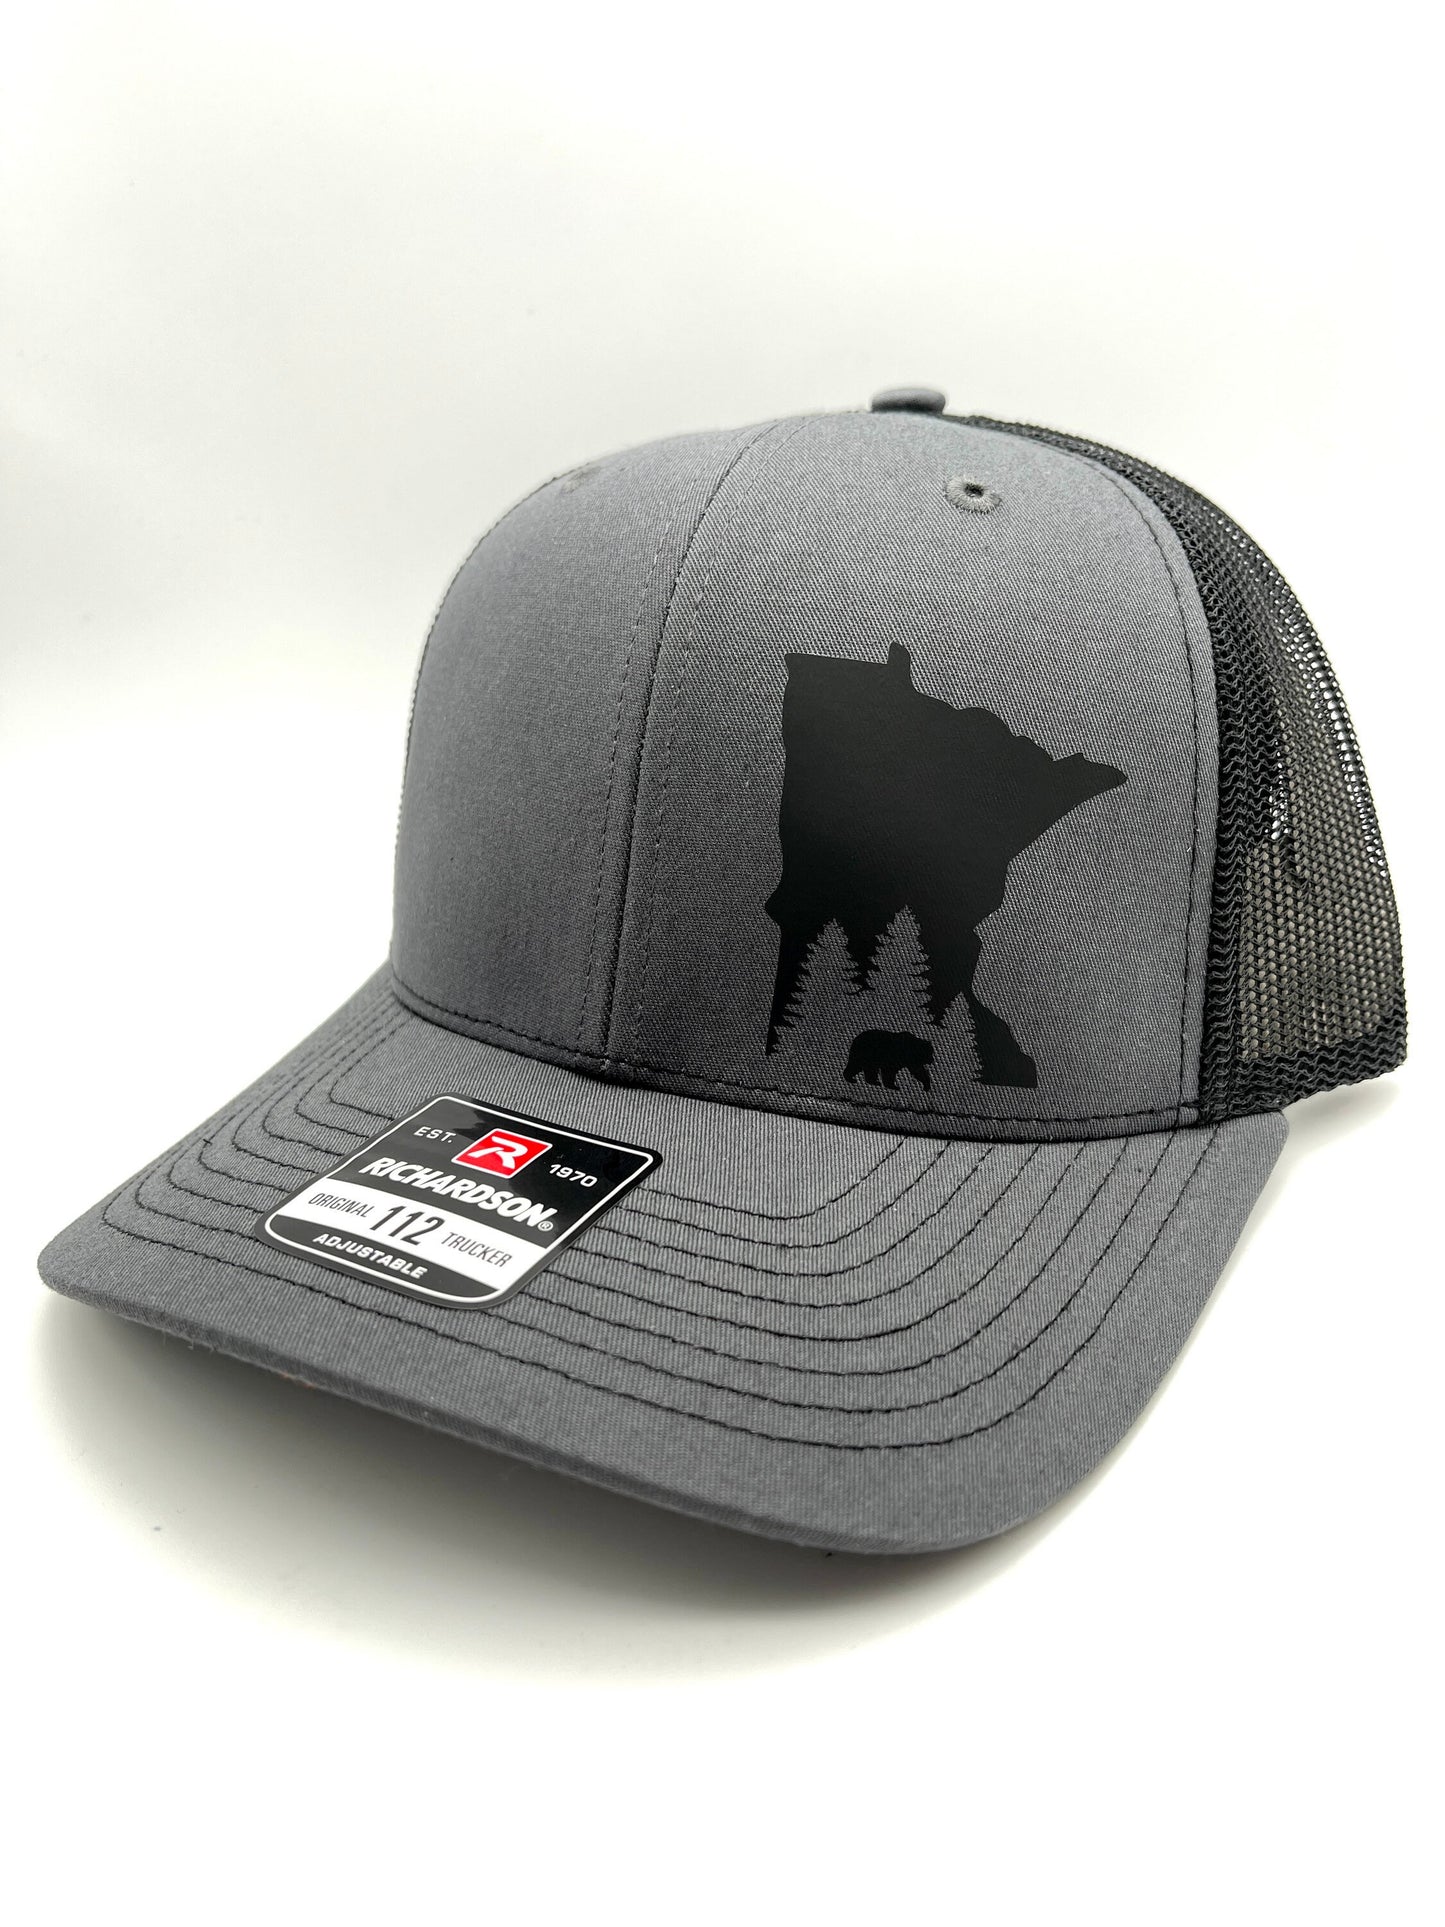 ANY STATE Bear Hunting Without Hounds SnapBack Adjustable Hat